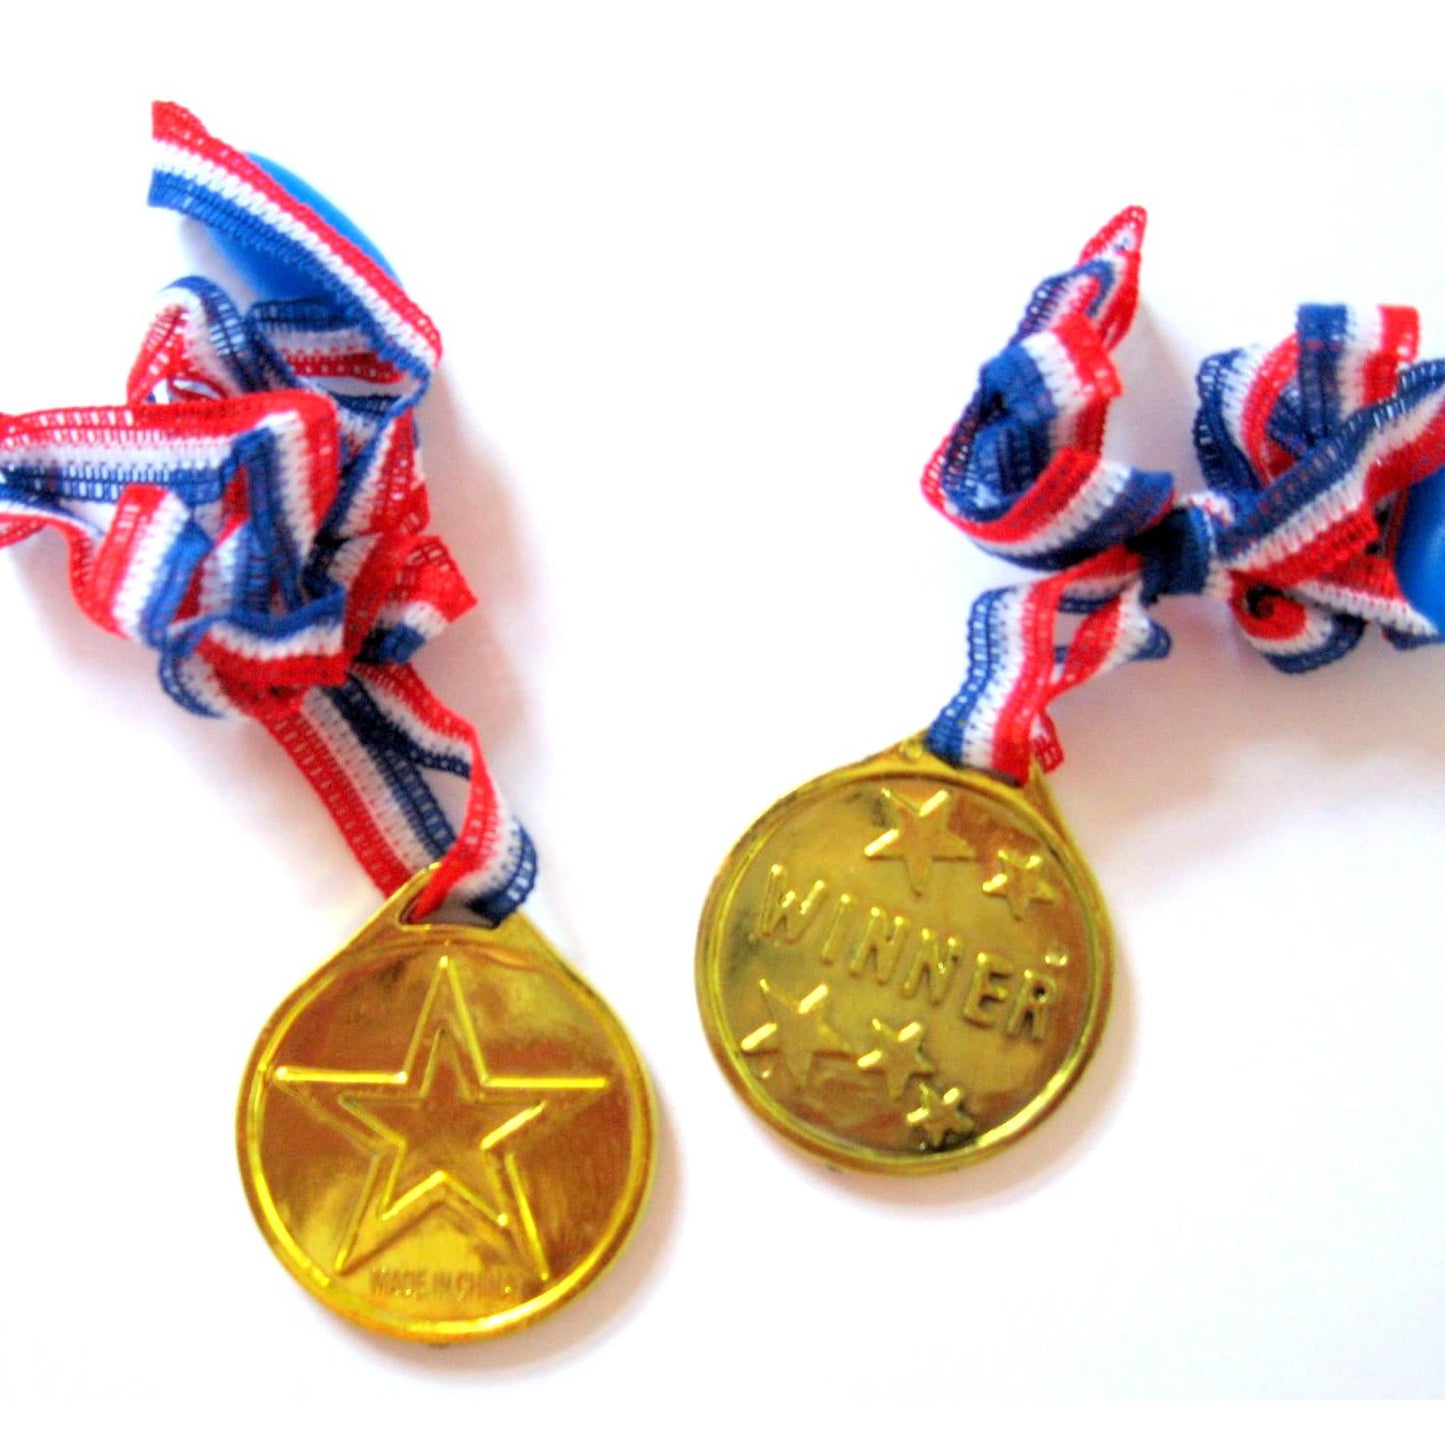 Plastic Gold Winners Medals on Lanyards